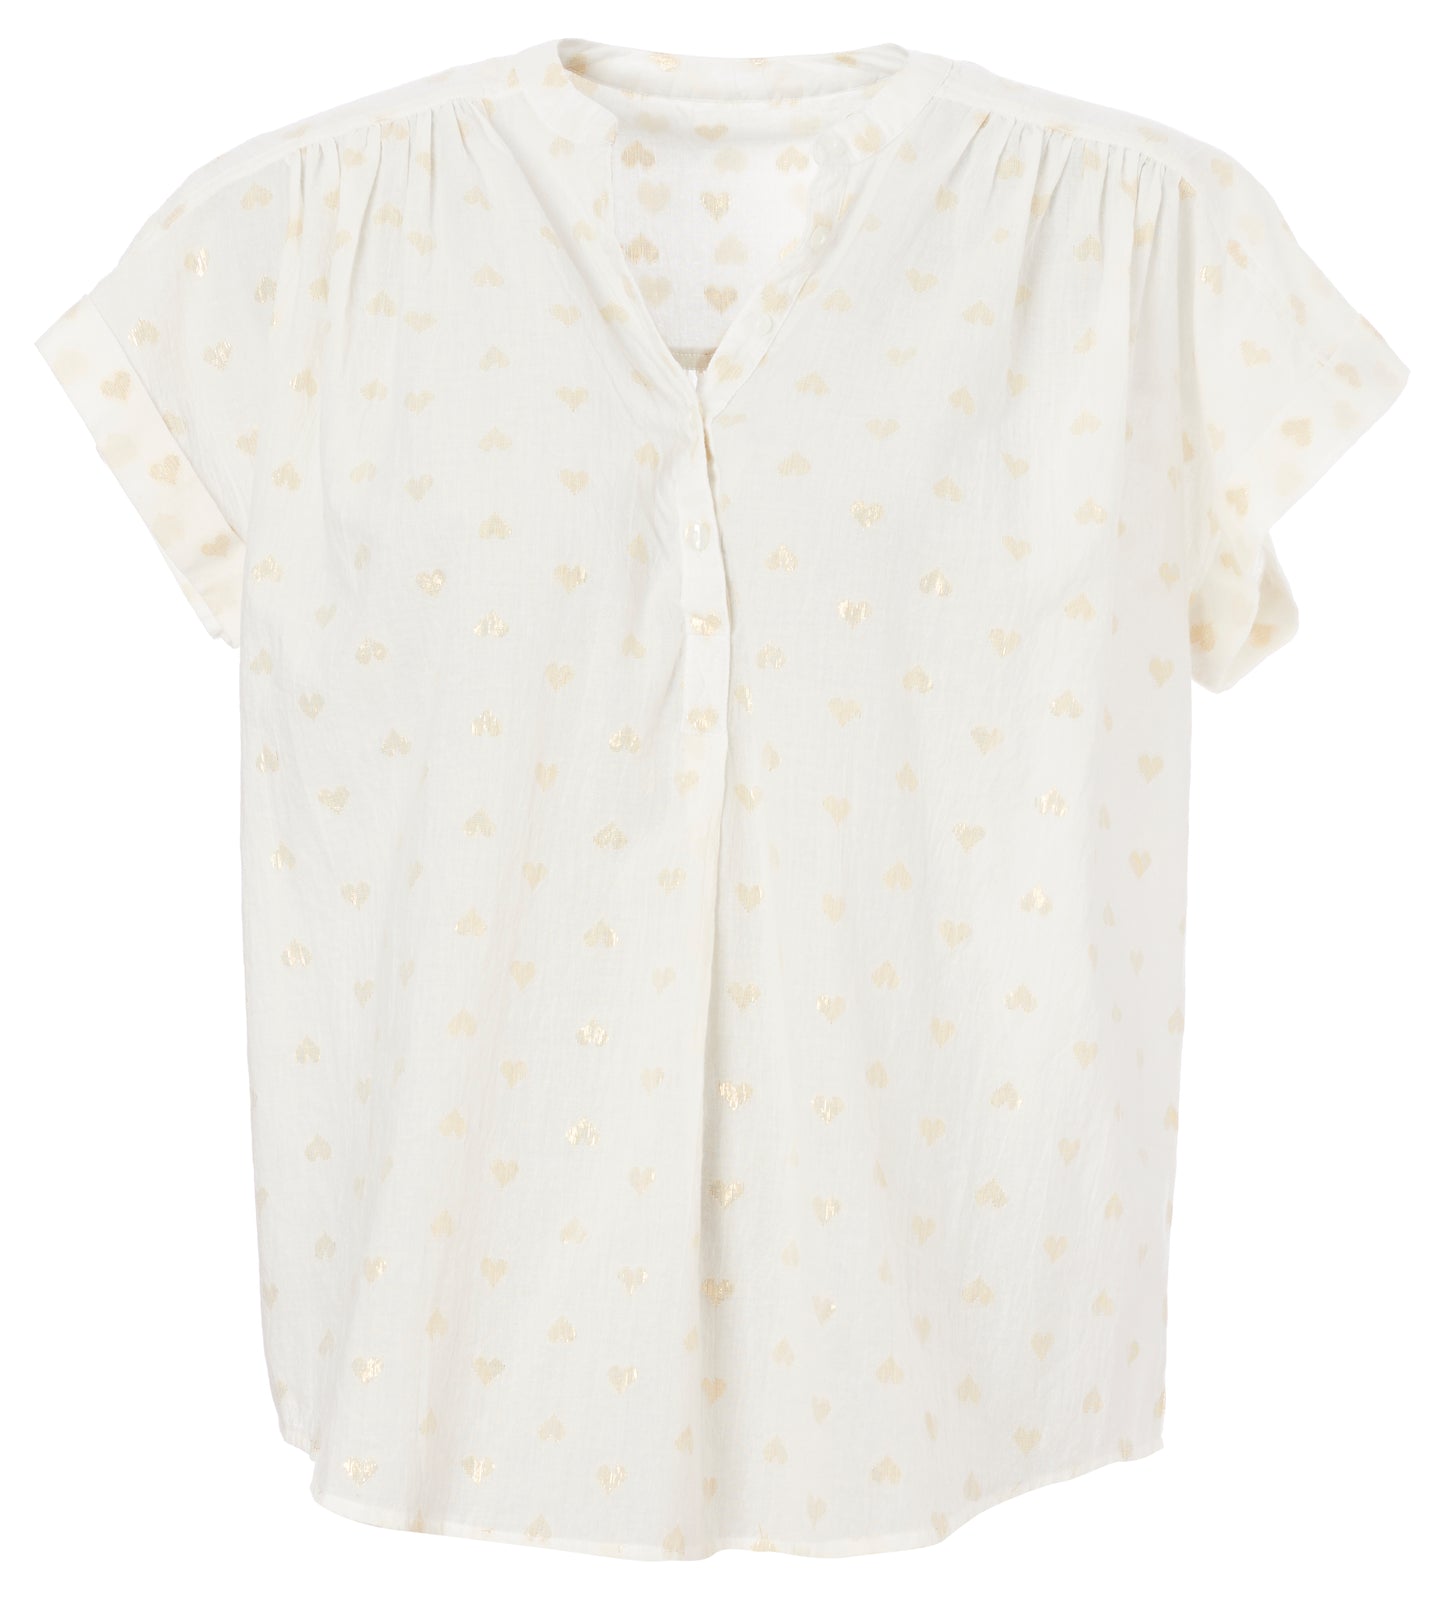 MABE Ora Gold Heart Top - Size M